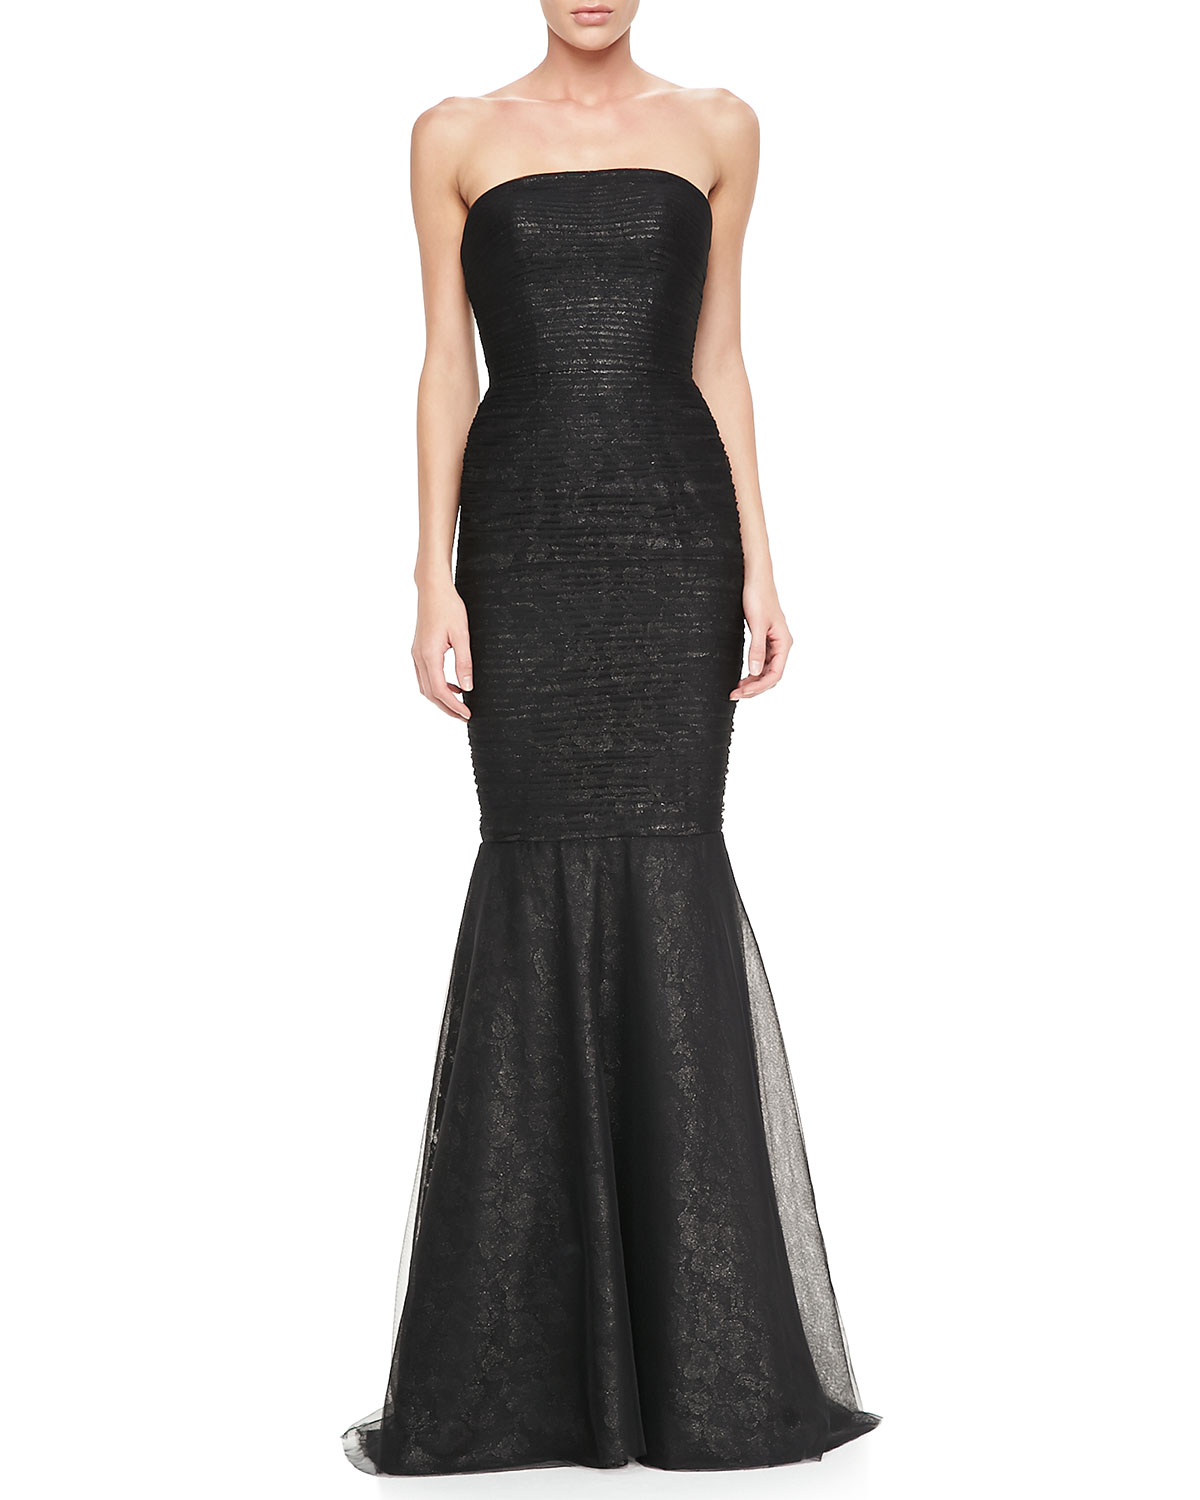 Ml monique lhuillier Strapless Lace Tulle Mermaid Gown in Black | Lyst